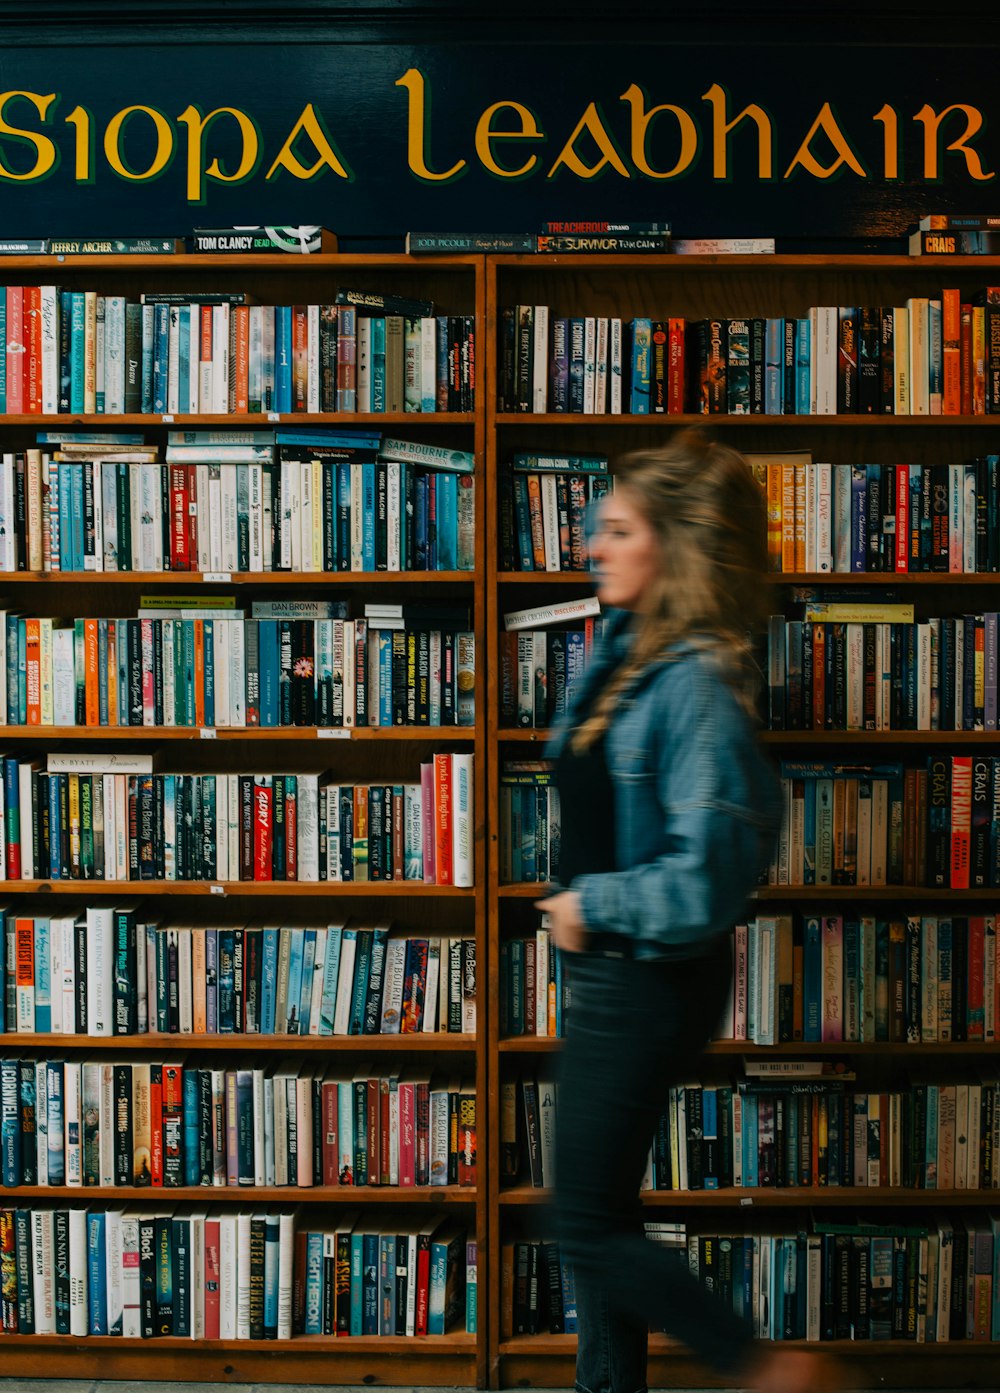 a woman walking past a book shelf filled with books